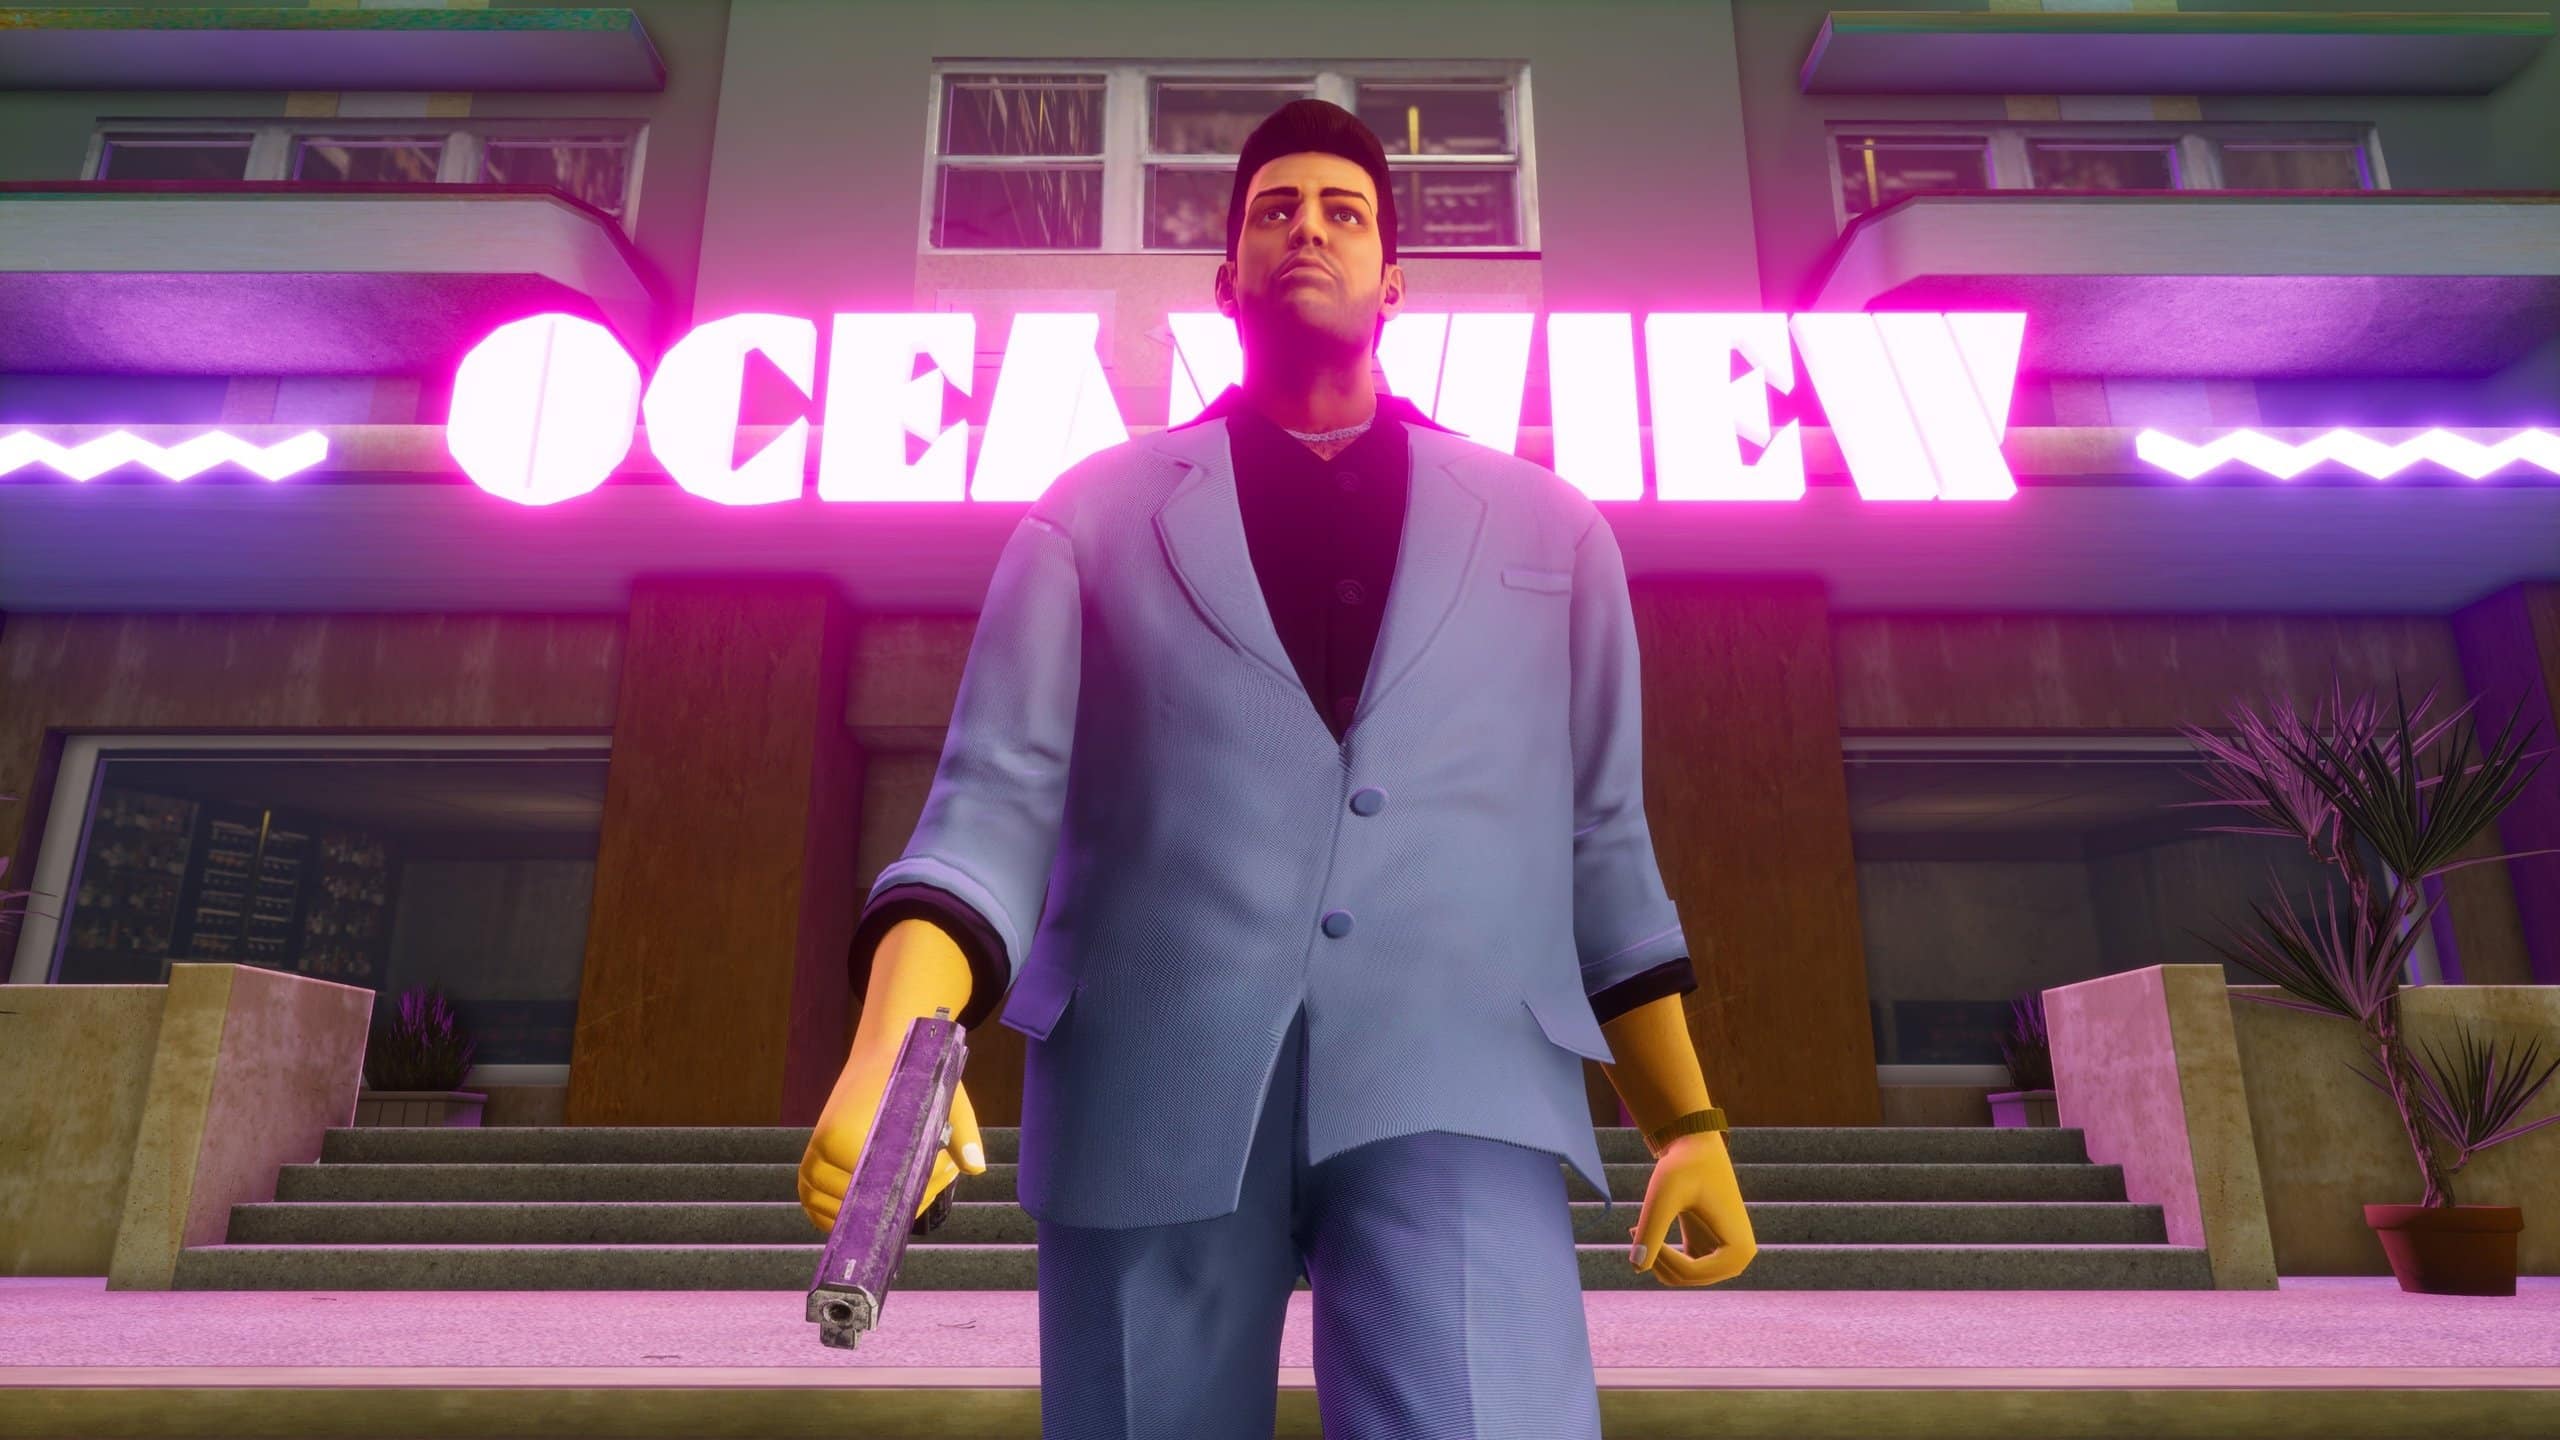 GTA: Vice City' announced for mobile